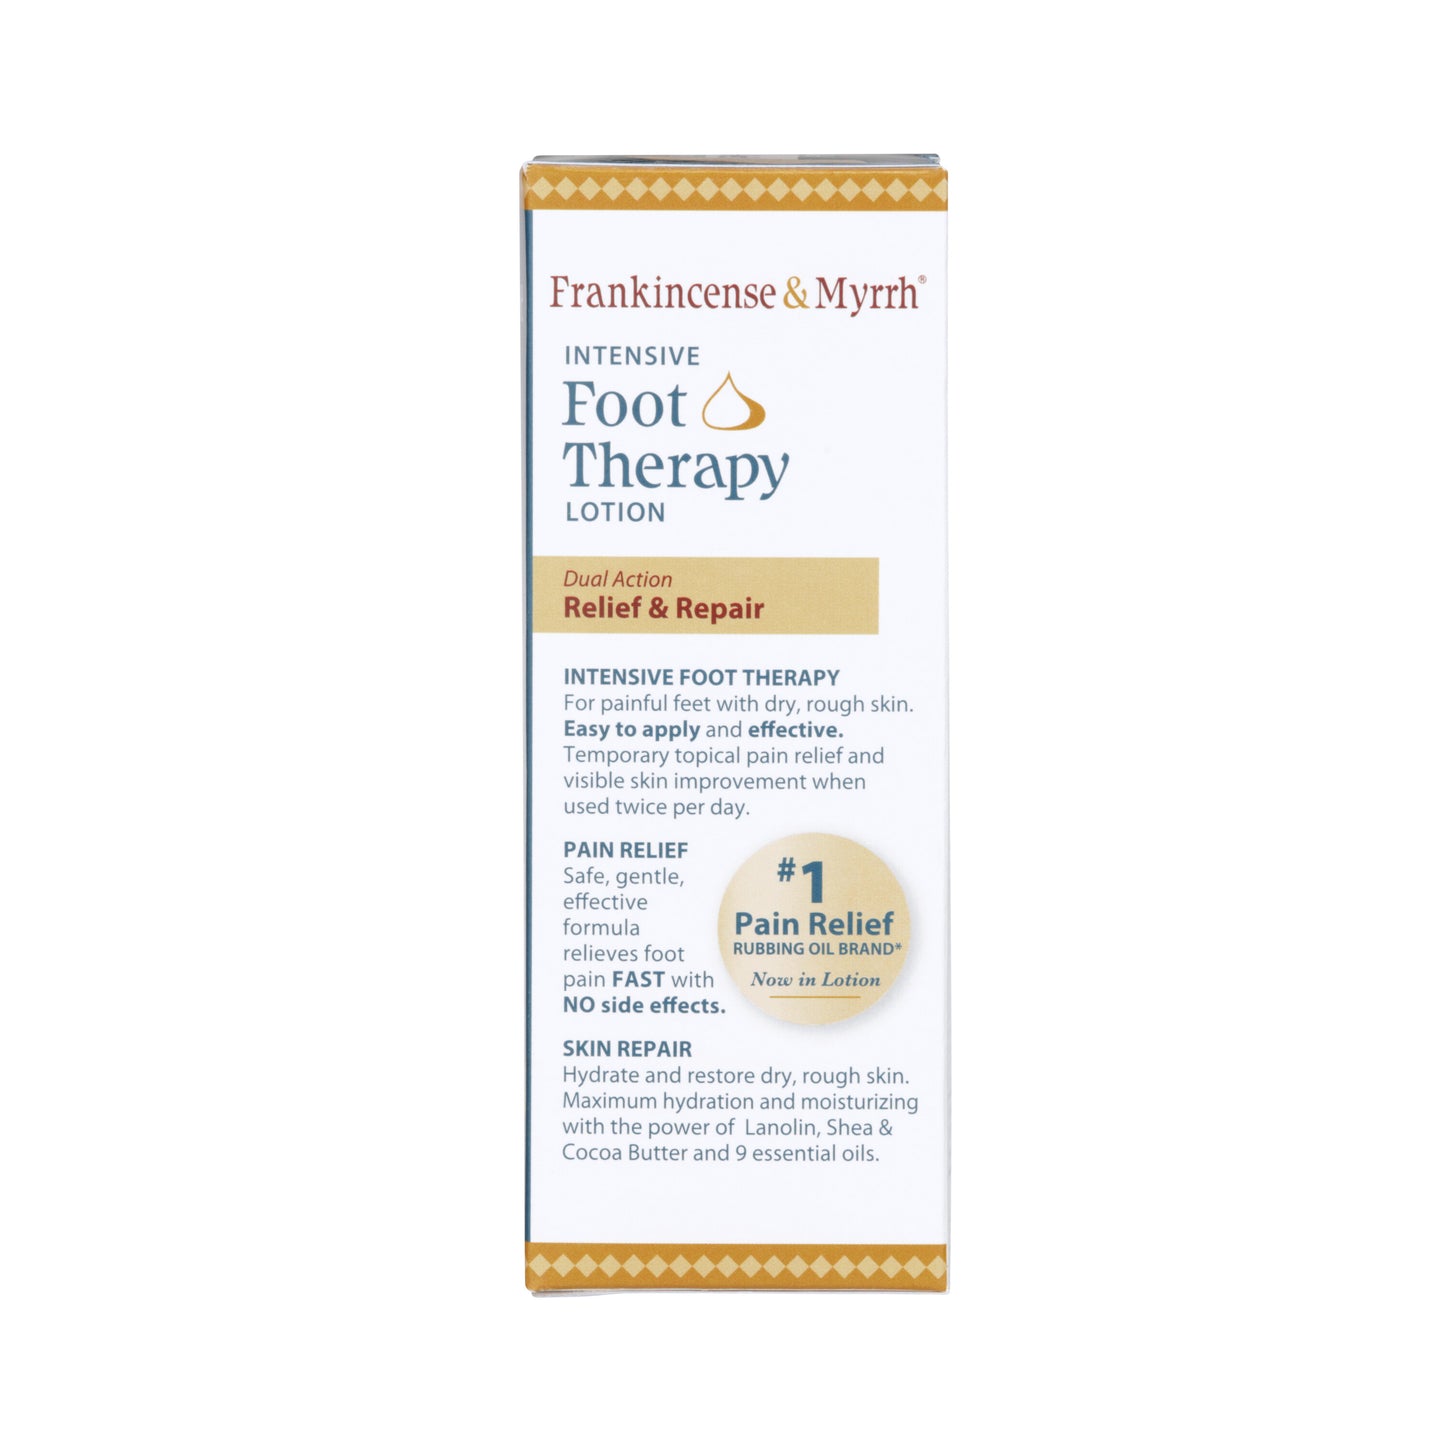 Frankincense & Myrrh Intensive Foot Therapy Lotion